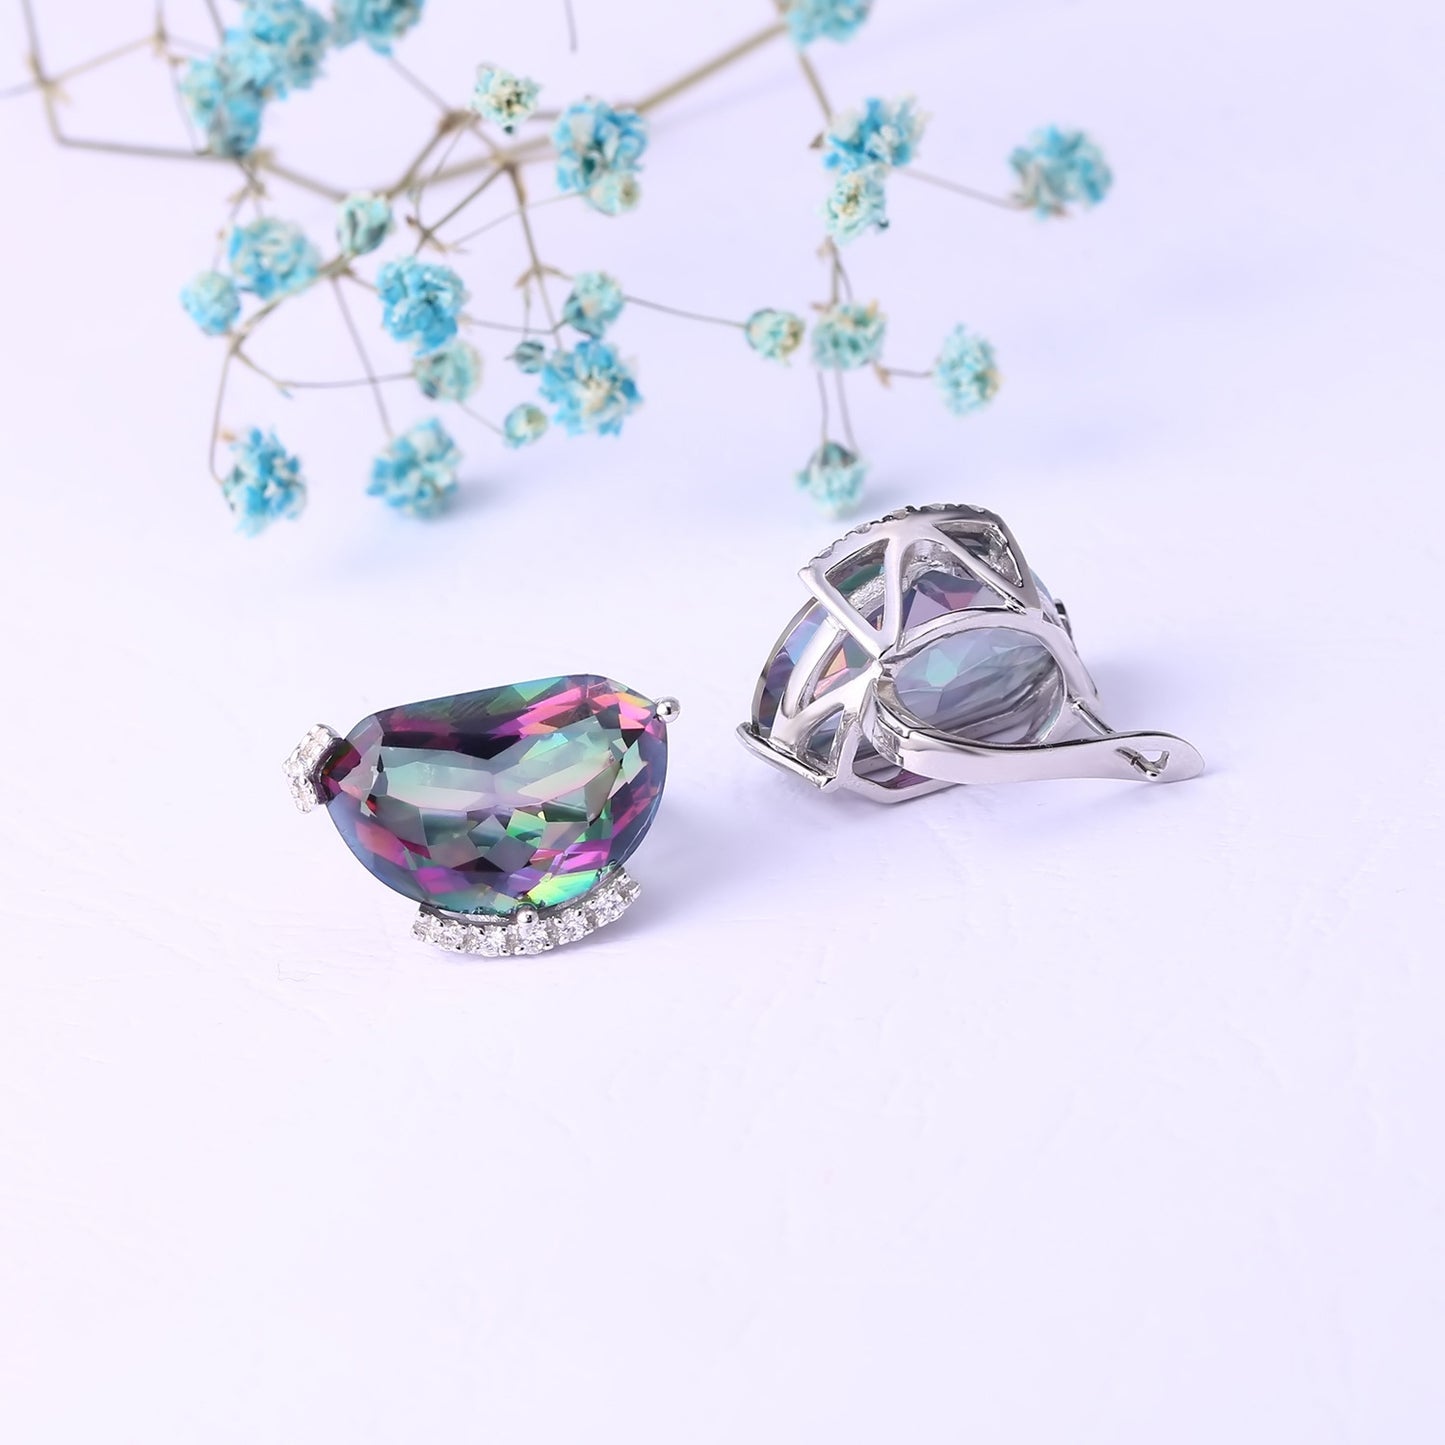 European Colourful Crystal Personality Special-shaped Silver Studs Earrings for Women